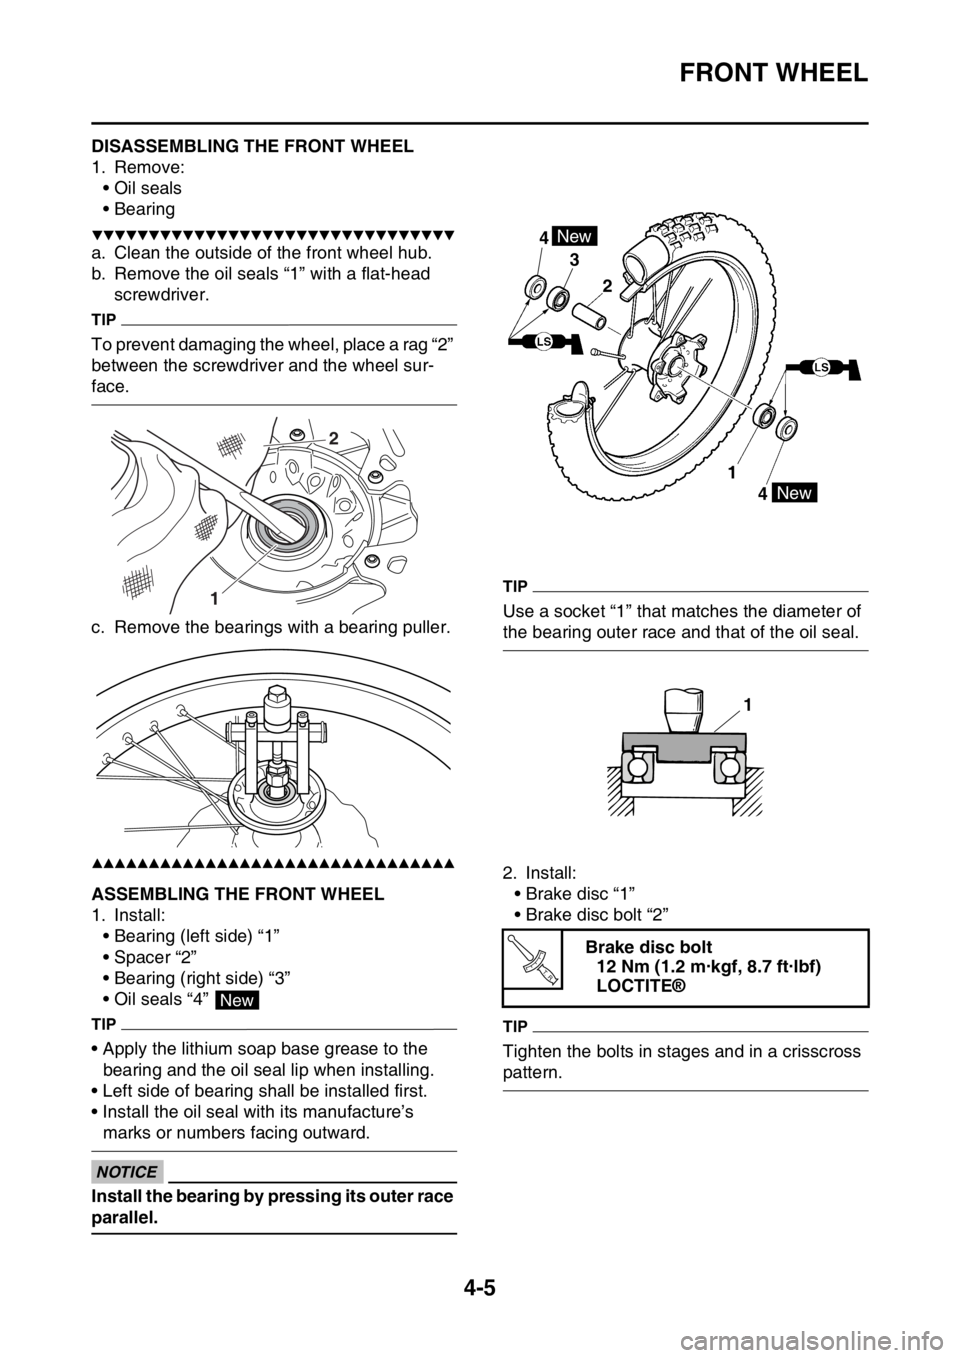 YAMAHA YZ250F 2015  Owners Manual FRONT WHEEL
4-5
EAS1SM5126DISASSEMBLING THE FRONT WHEEL
1. Remove:
• Oil seals
• Bearing
▼▼▼▼▼▼▼▼▼▼▼▼▼▼▼▼▼▼▼▼▼▼▼▼▼▼▼▼▼▼▼▼
a. Clean t